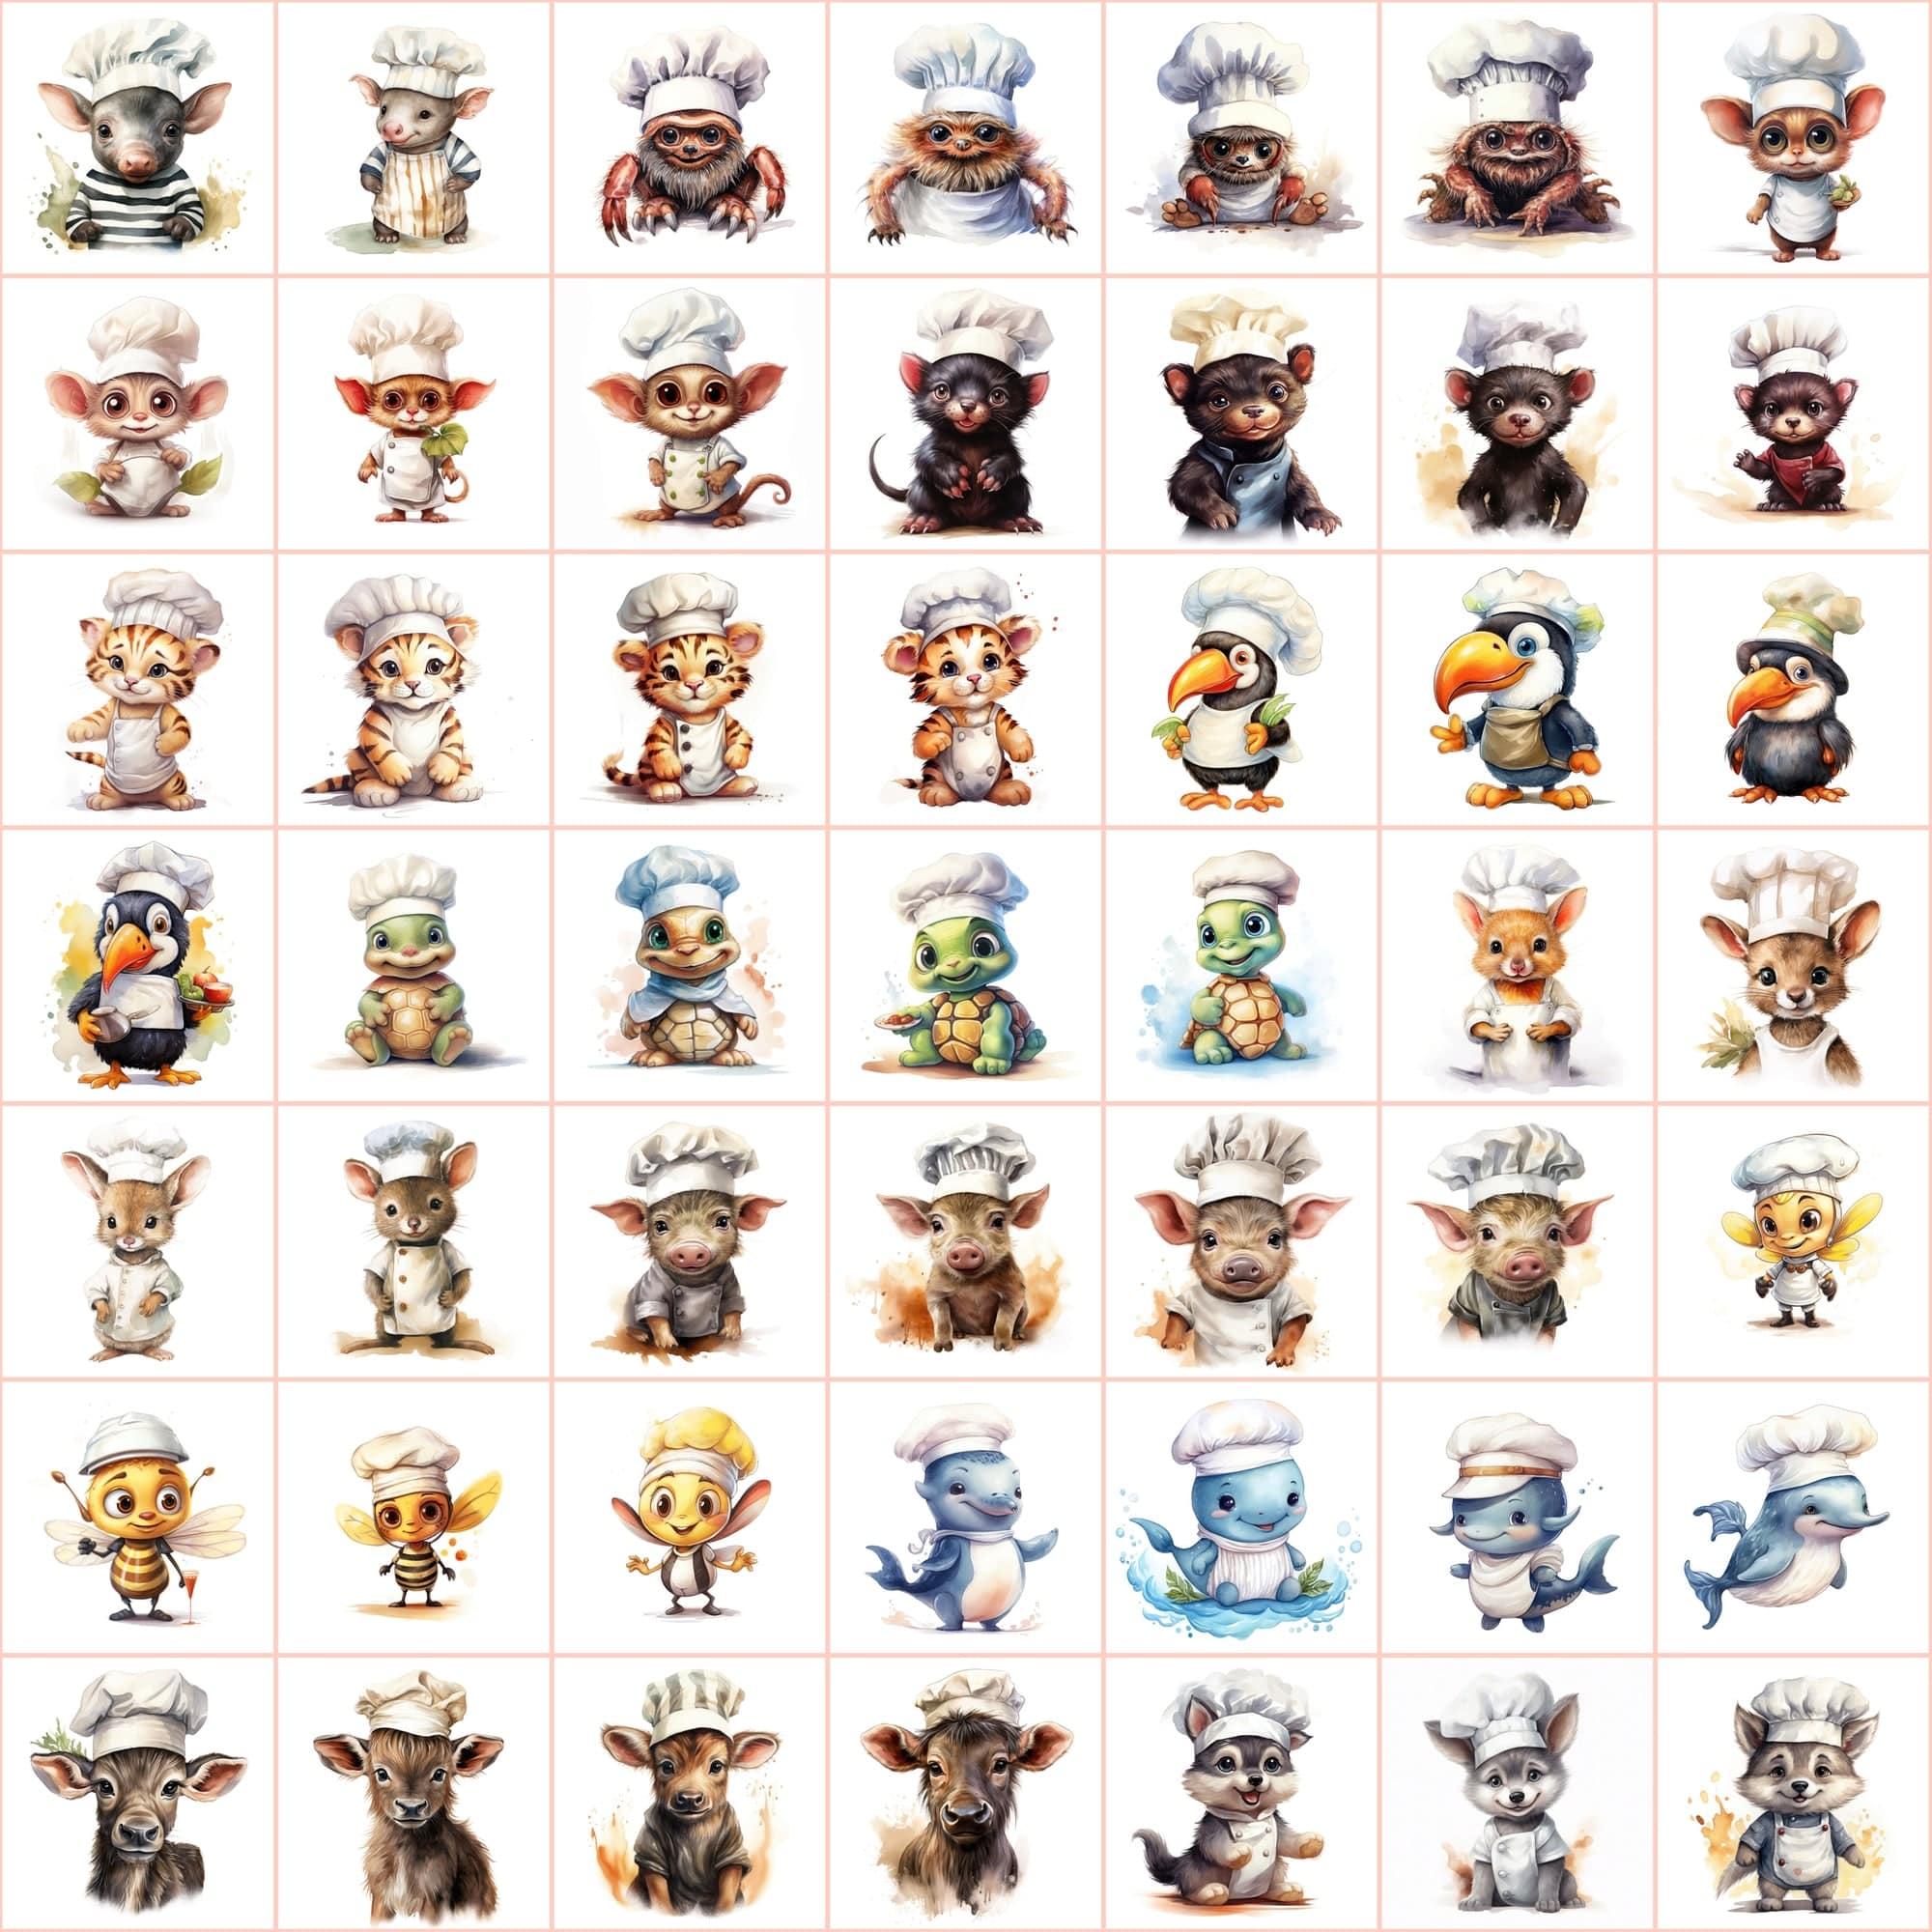 Watercolor Animals with Chef Hats, 590 PNG Images, White & Transparent Backgrounds, Commercial License Included Digital Download Sumobundle